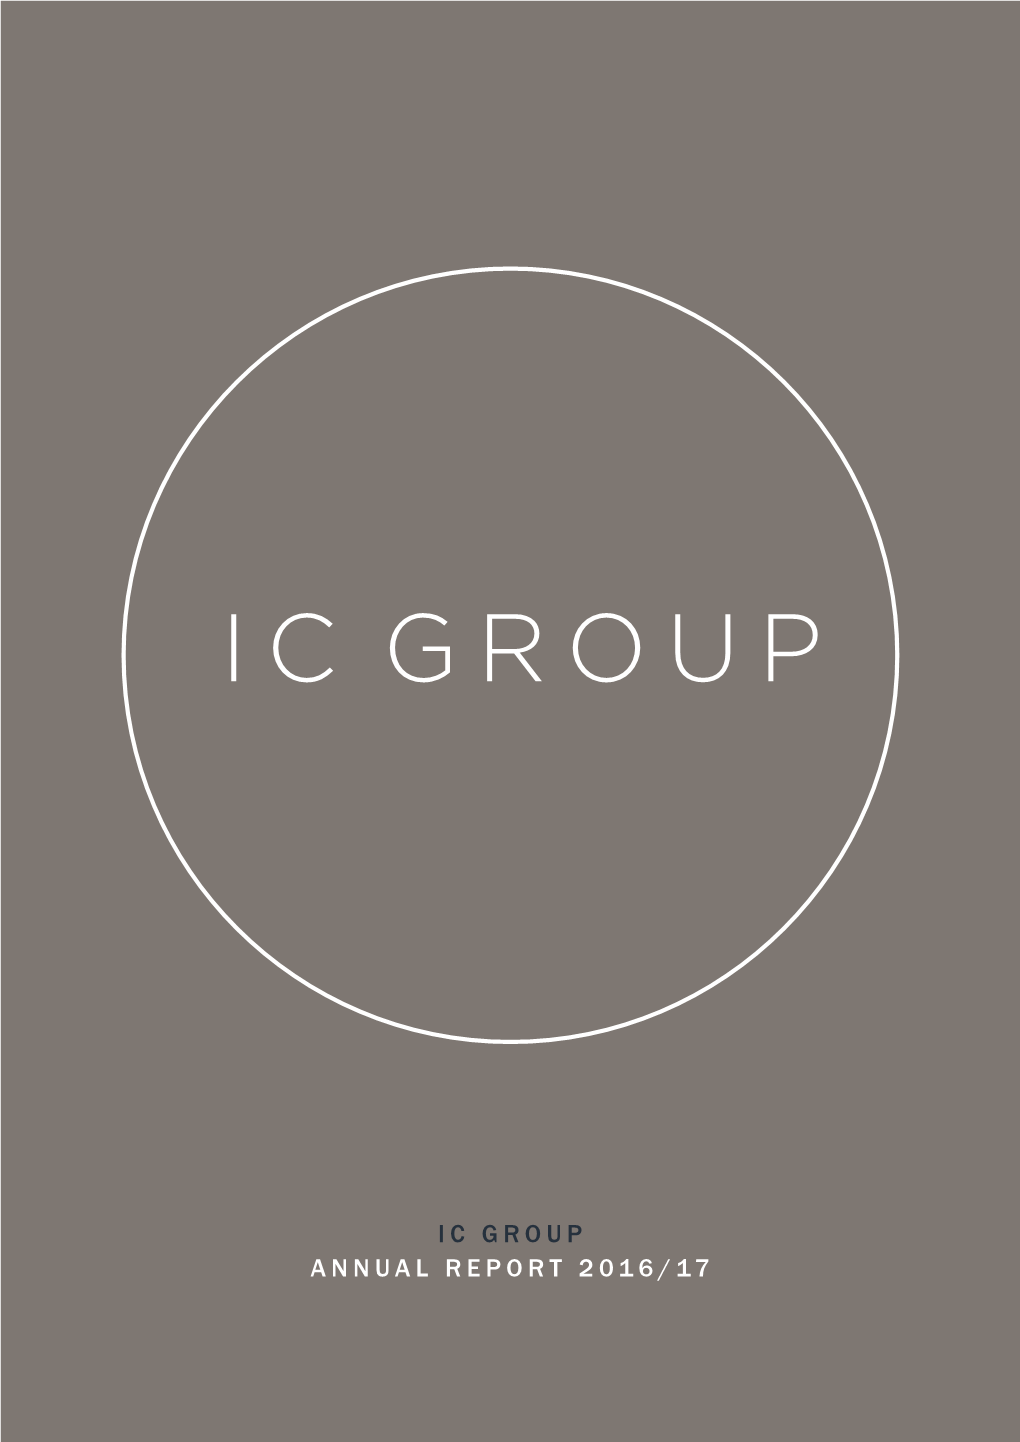 Ic Group Annual Report 2016/17